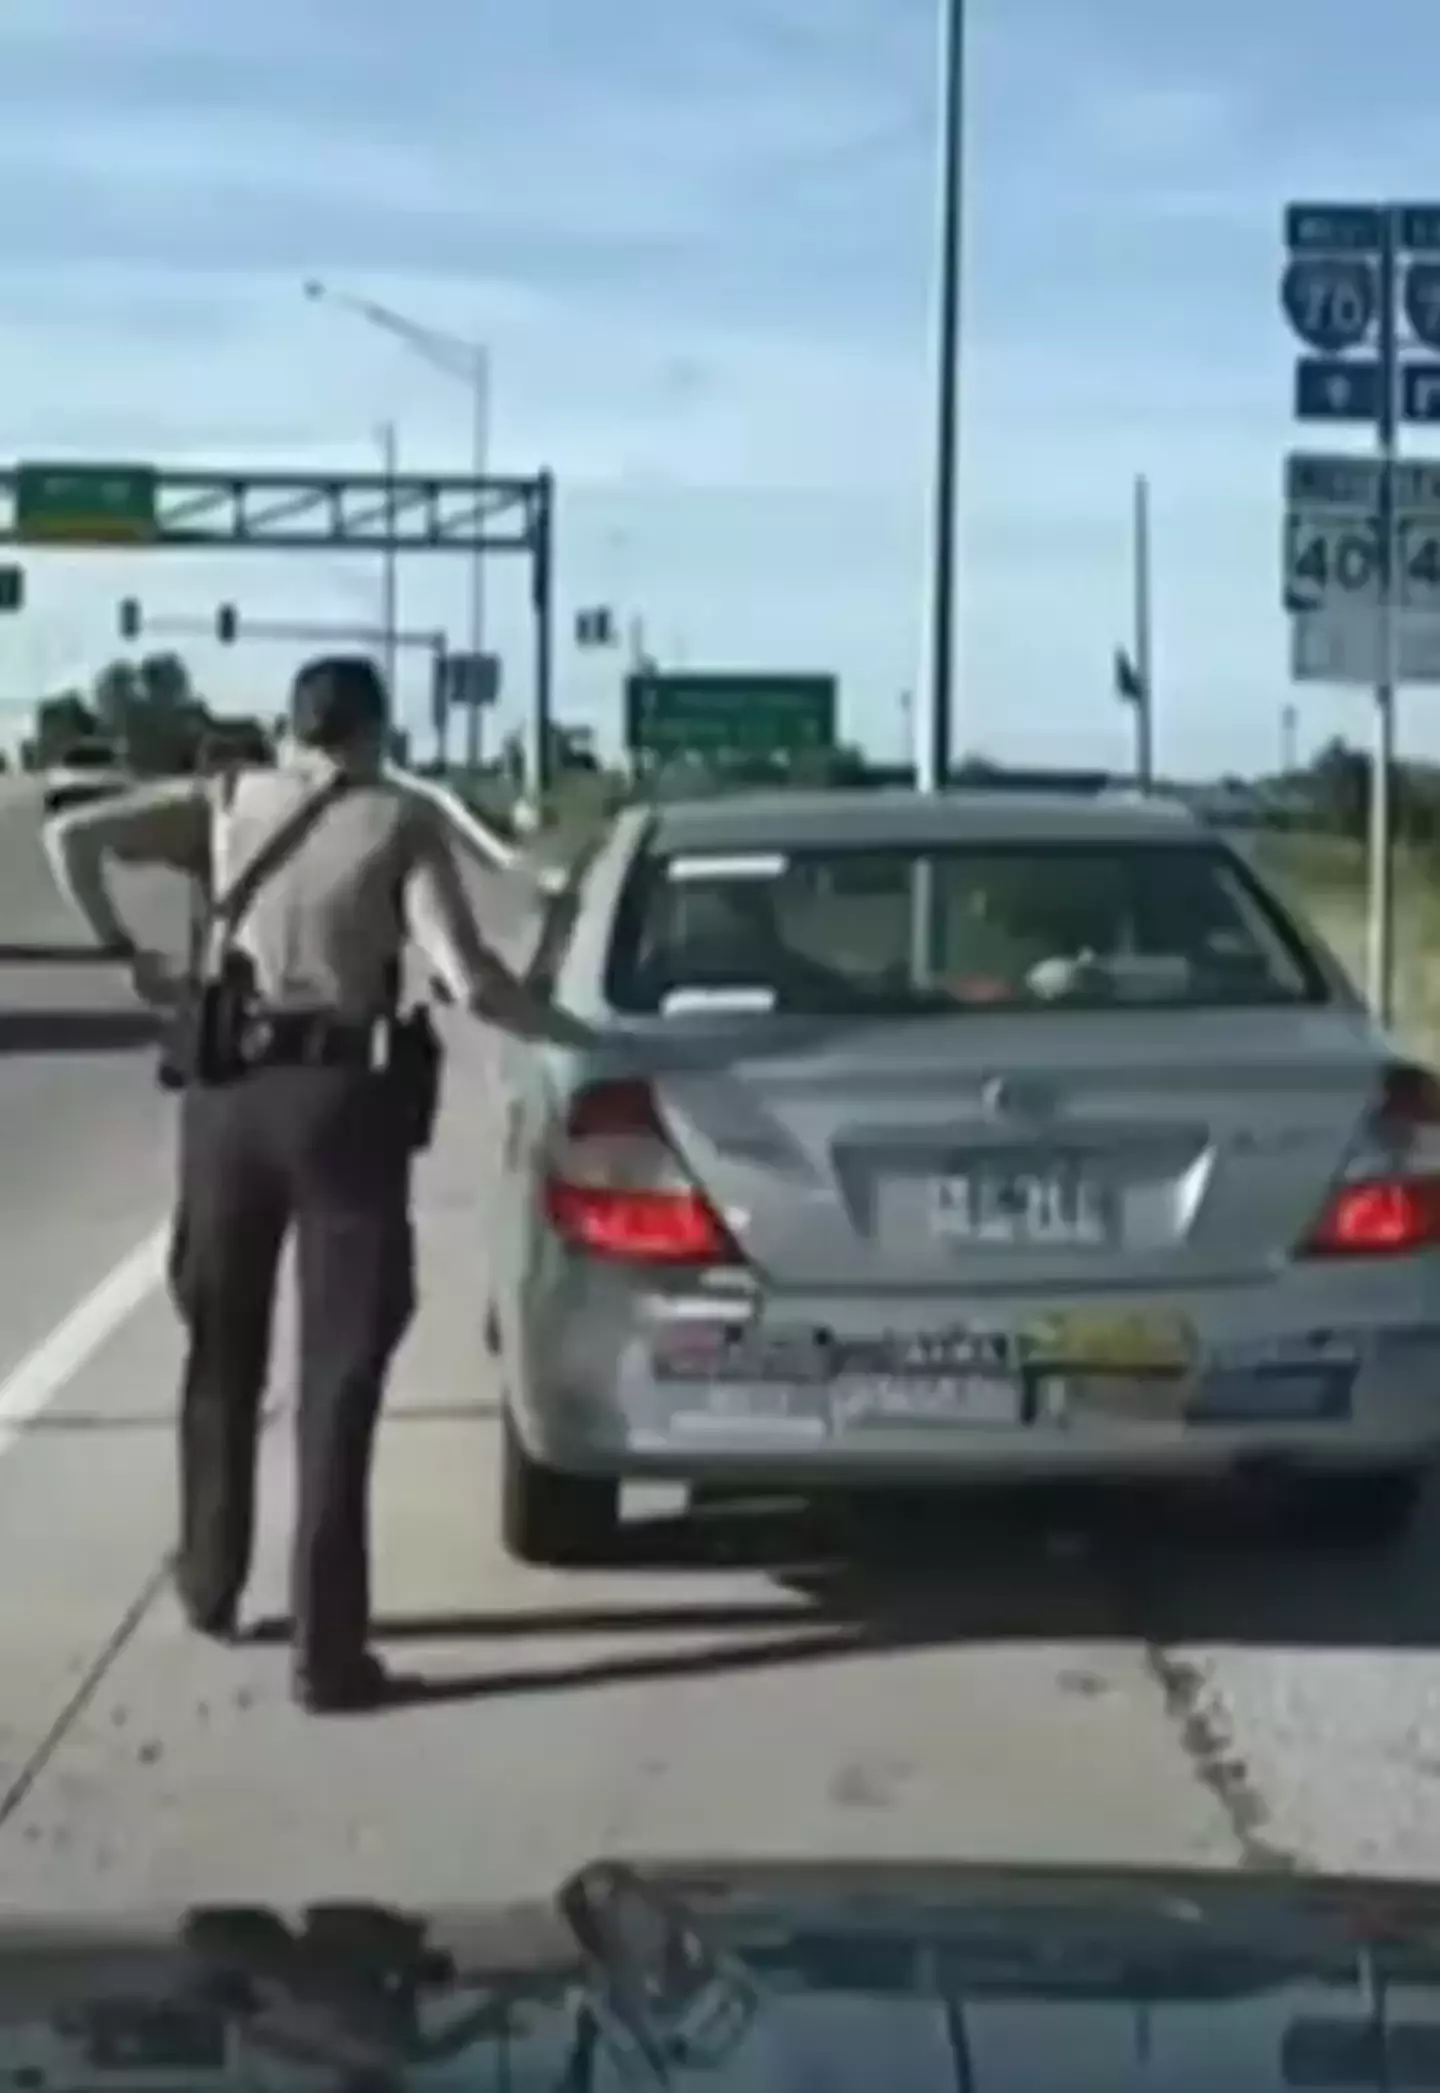 Have you ever wondered why police officers always touch the back of cars they pull over?